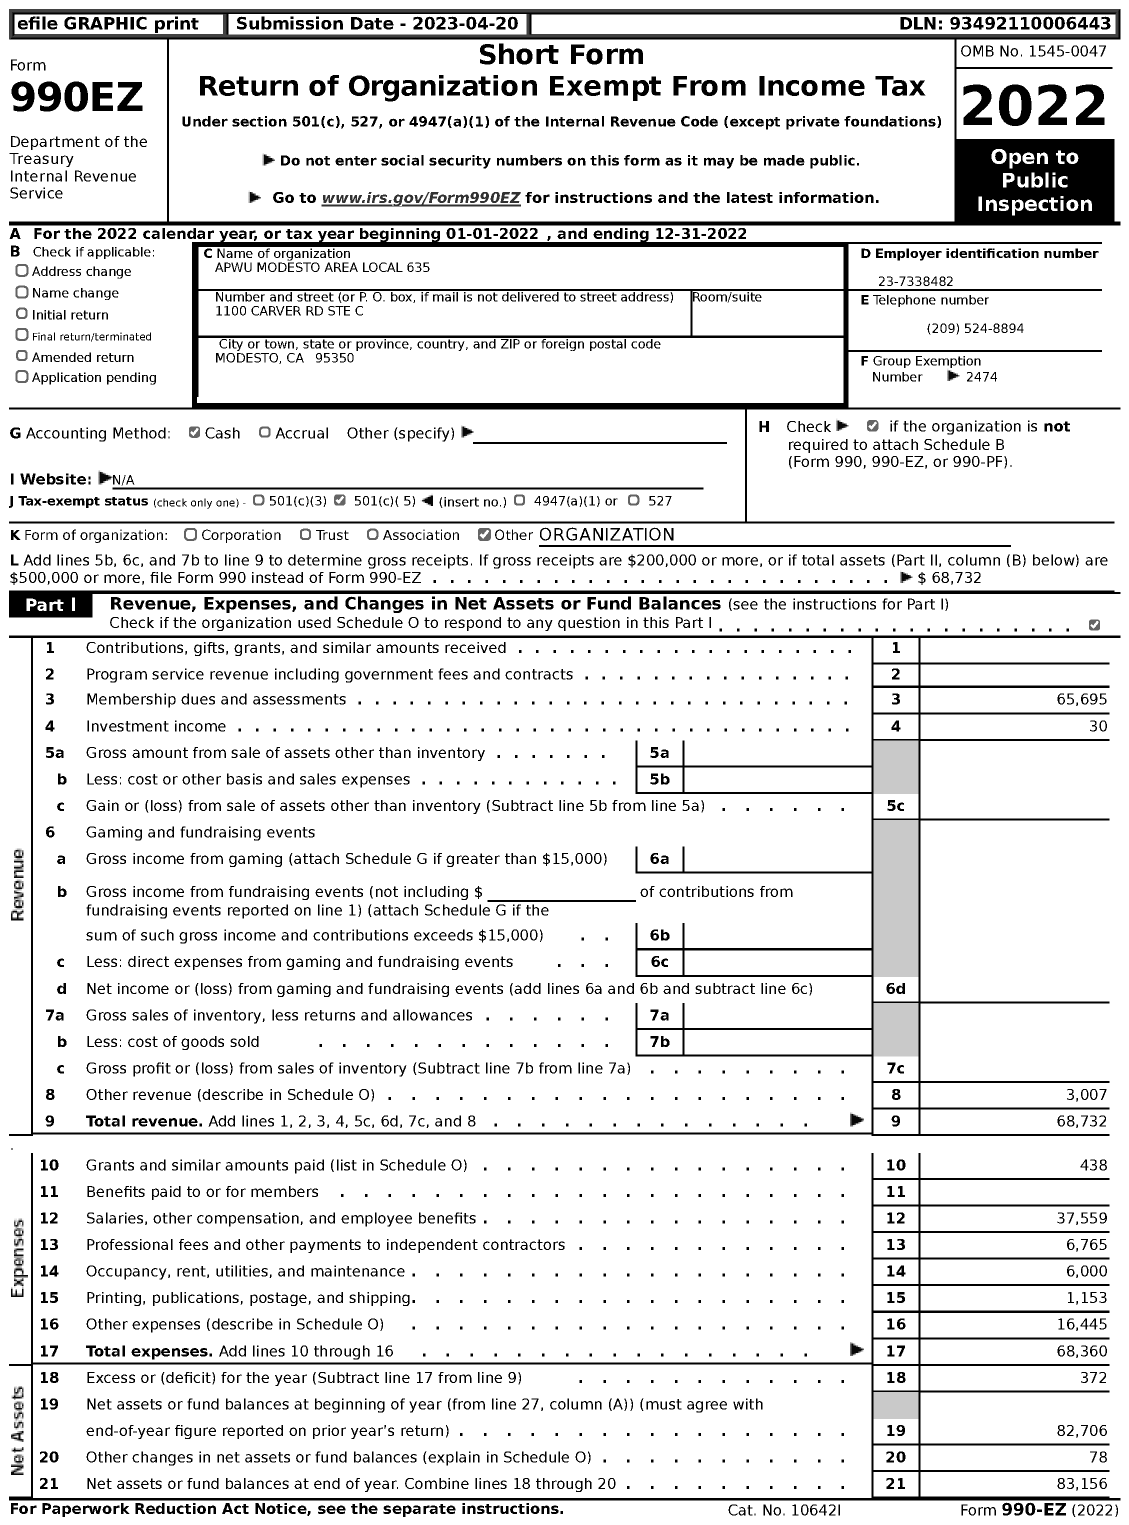 Image of first page of 2022 Form 990EZ for American Postal Workers Union - 635 Modesto Area Local